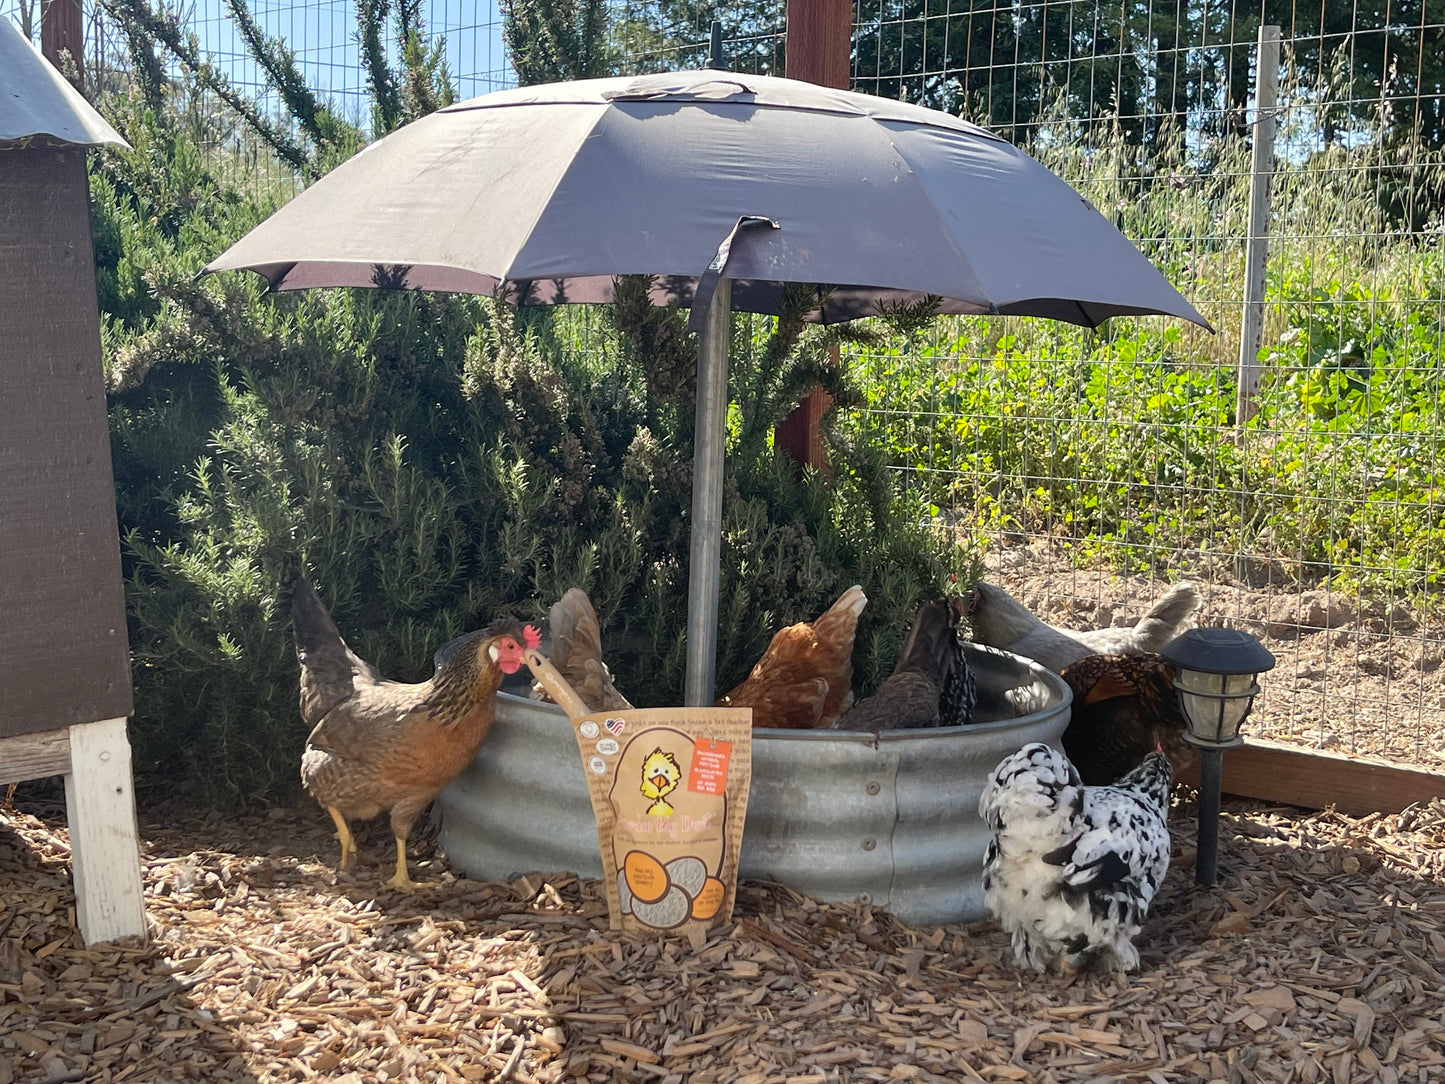 My Umbrella Dusting Station For Chickens + DIY Tips - Pardon My Dust